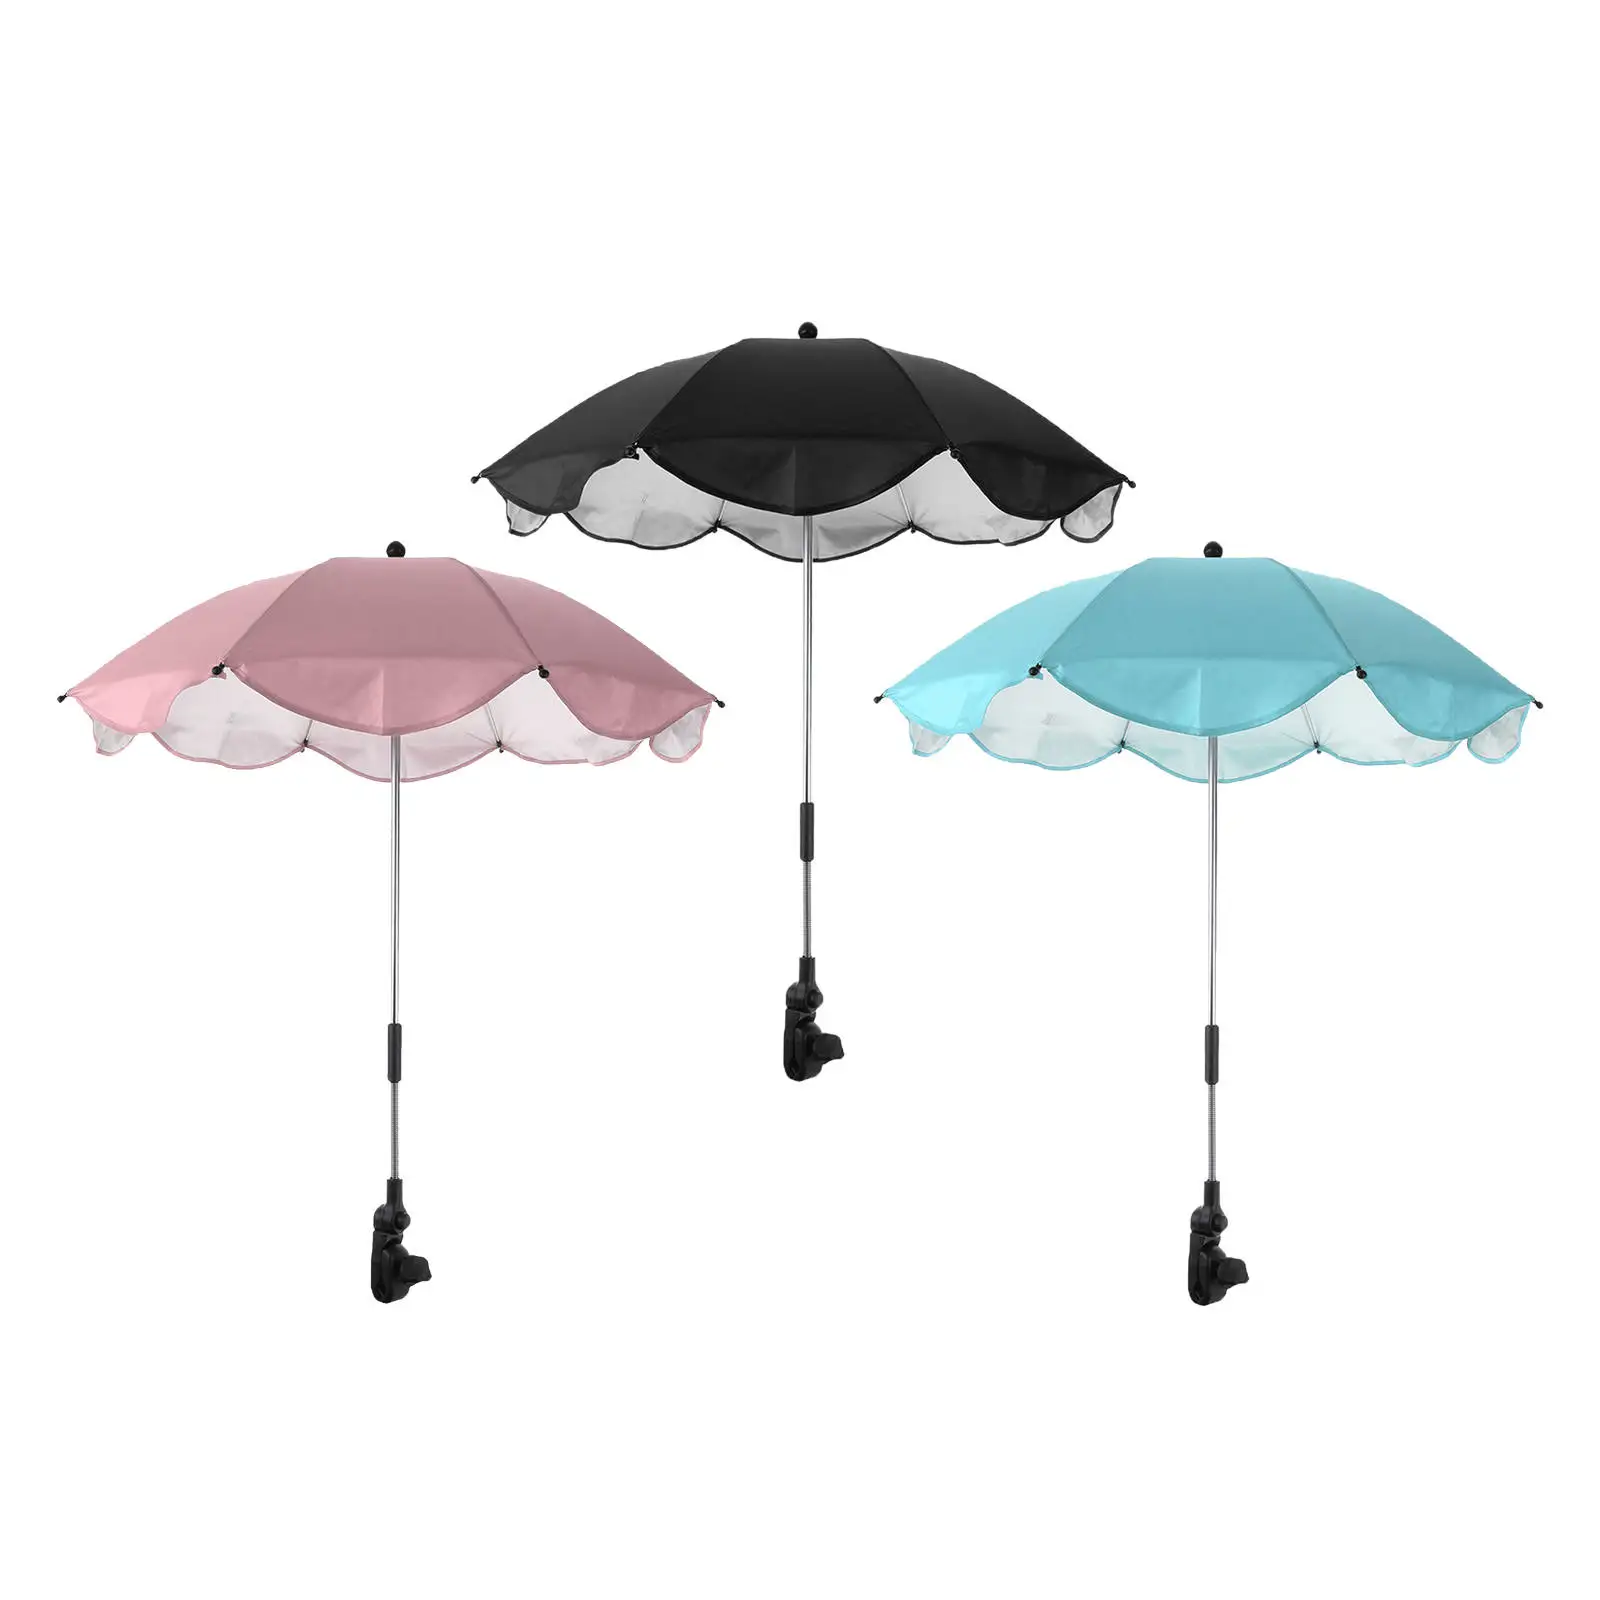 used baby strollers near me Adjustable Baby Stroller Umbrella Clamp-On Shade Folding 360 Degree Rain Flexible Sunshade Canopies for Pram Buggy Pushchair baby trend jogging stroller accessories